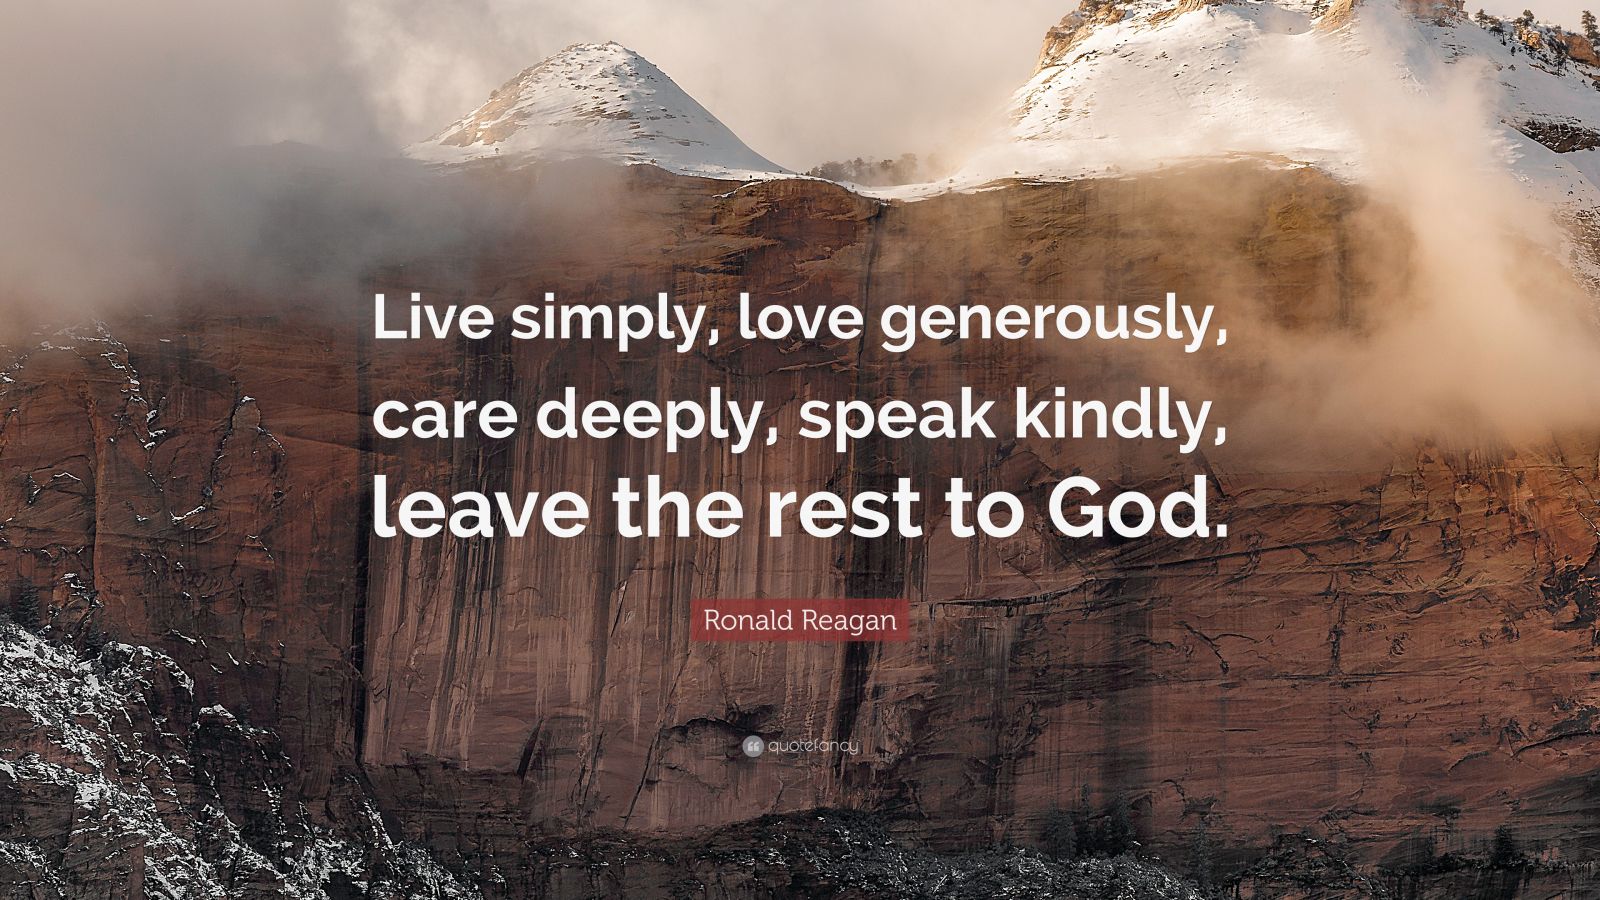 Ronald Reagan Quote: "Live simply, love generously, care ...